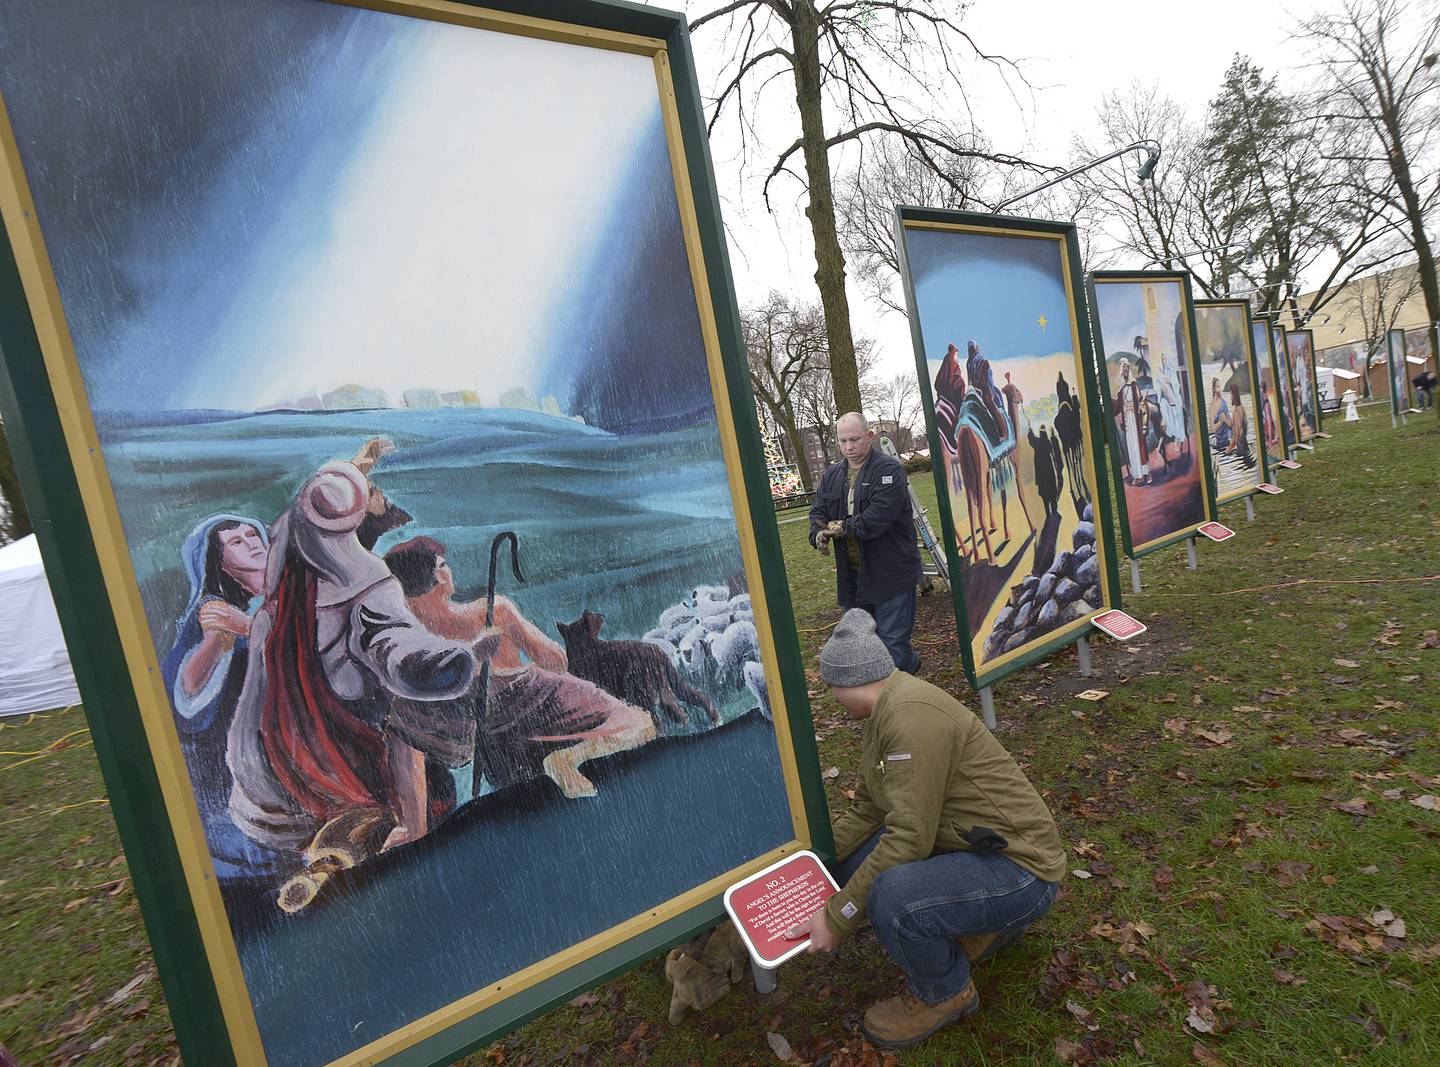 Many volunteers were on hand Saturday morning to help put up the 4-foot-7 paintings depicting the life of  Christ at Washington Square in Ottawa.